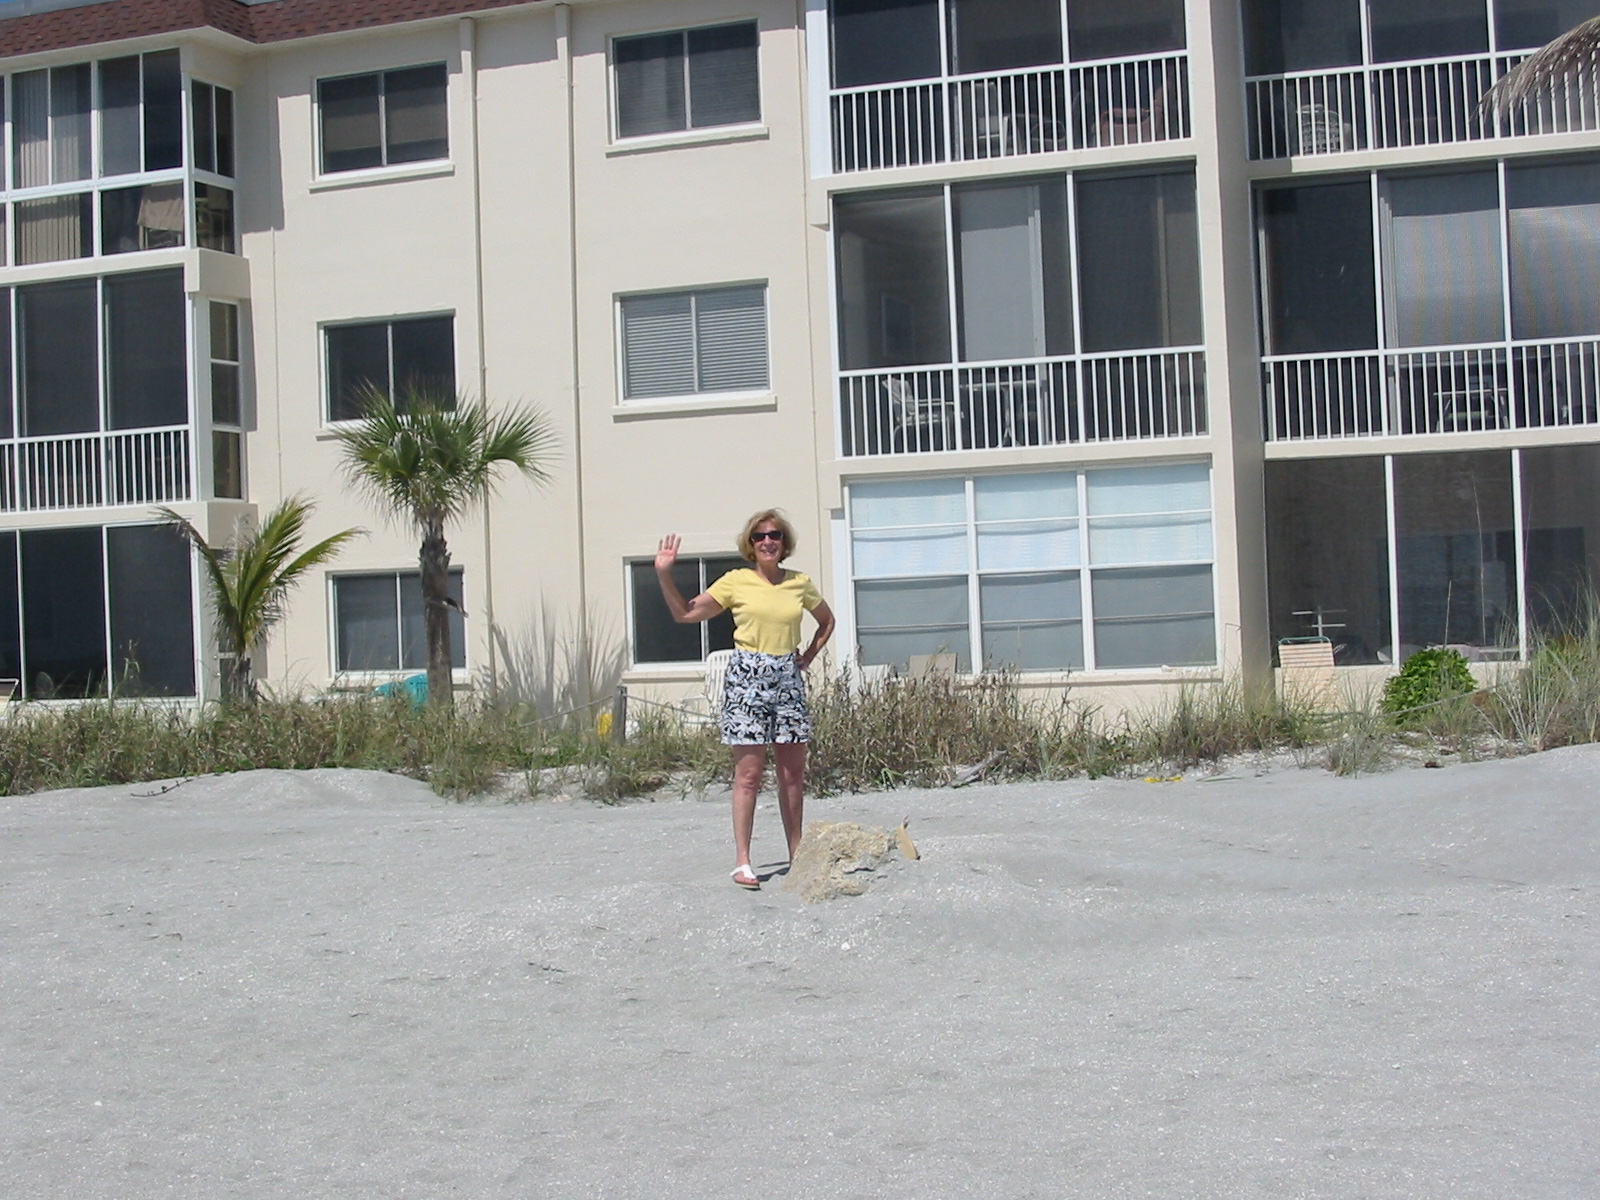 Here I am on the beach in front of my condo